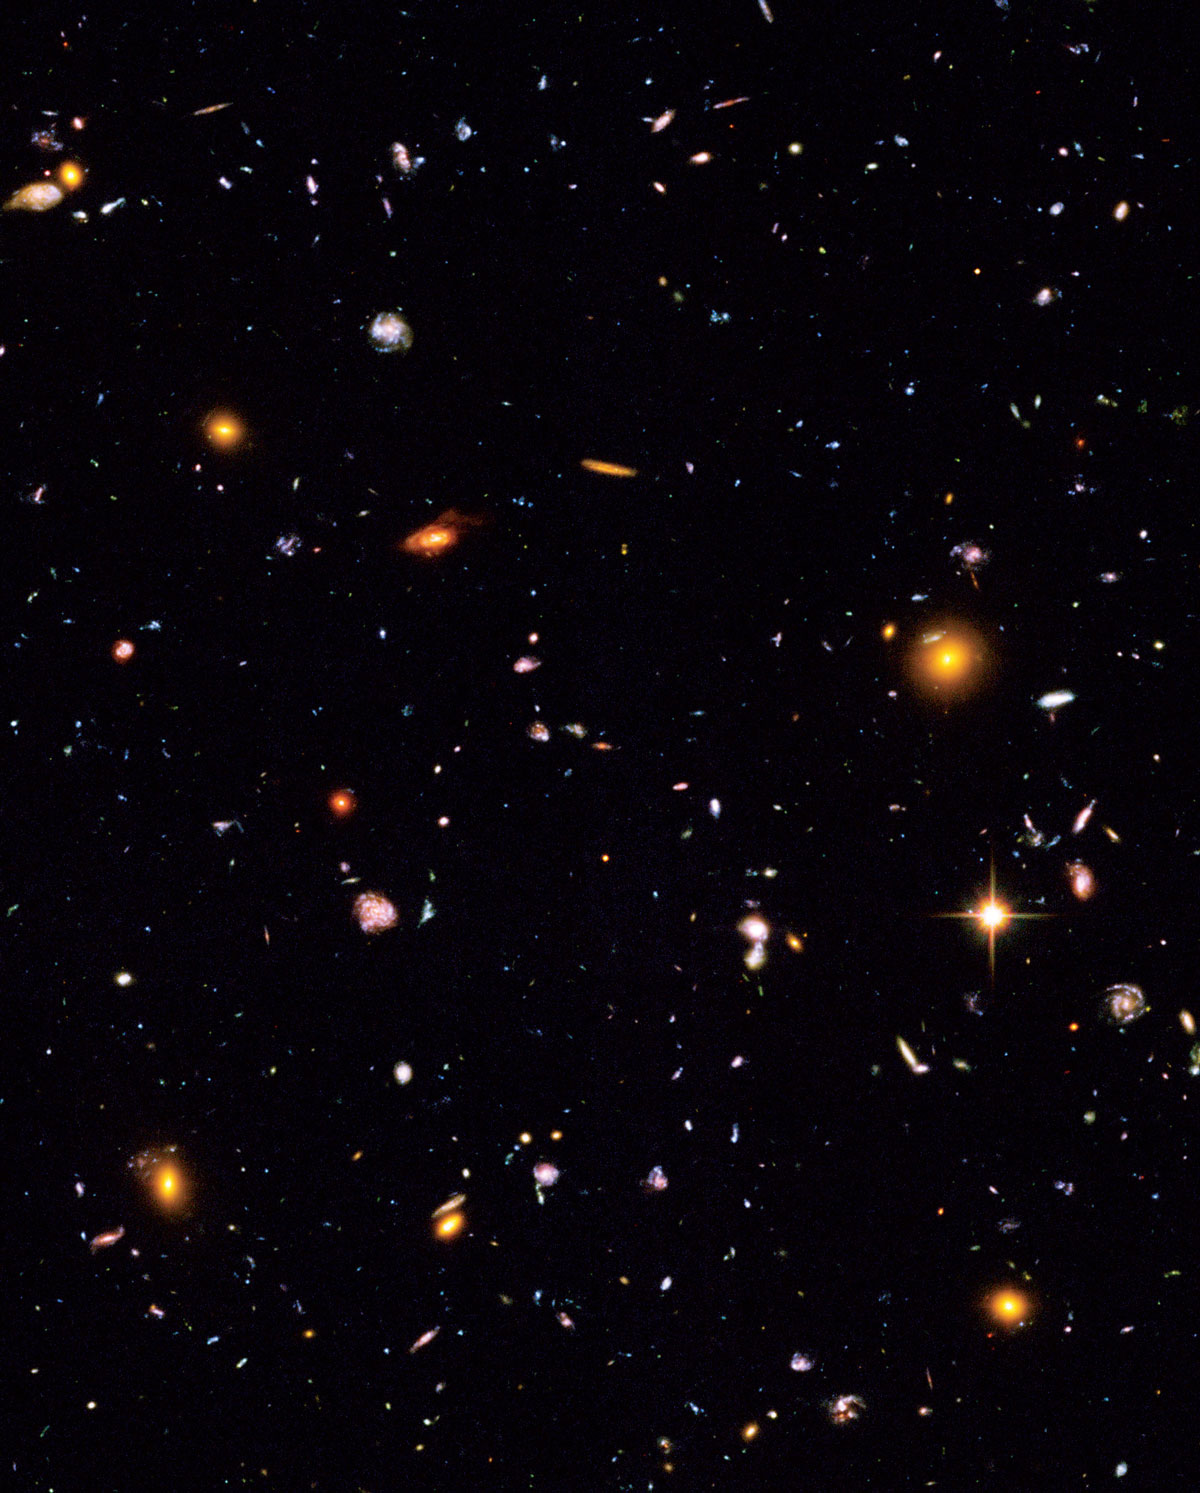 Detail from the Hubble Ultra Deep Field, 2003–2004. This million-second-long exposure is, according to NASA, “the deepest portrait of the
visible universe ever achieved by humankind.”